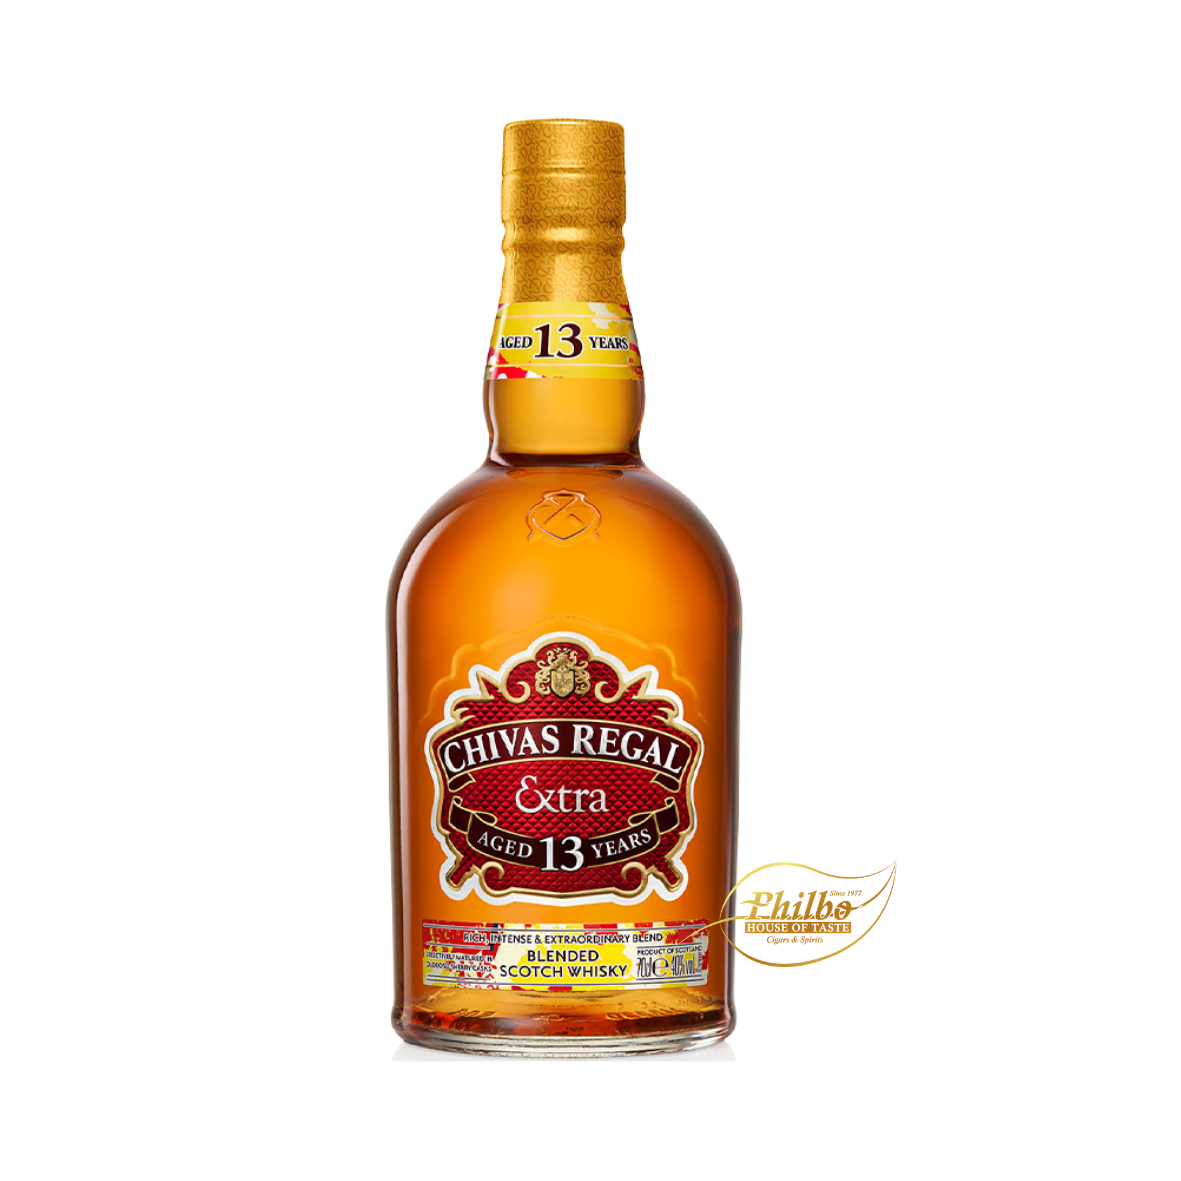 Chivas Regal 13 years extra oloroso sherry cask 70cl / 40%